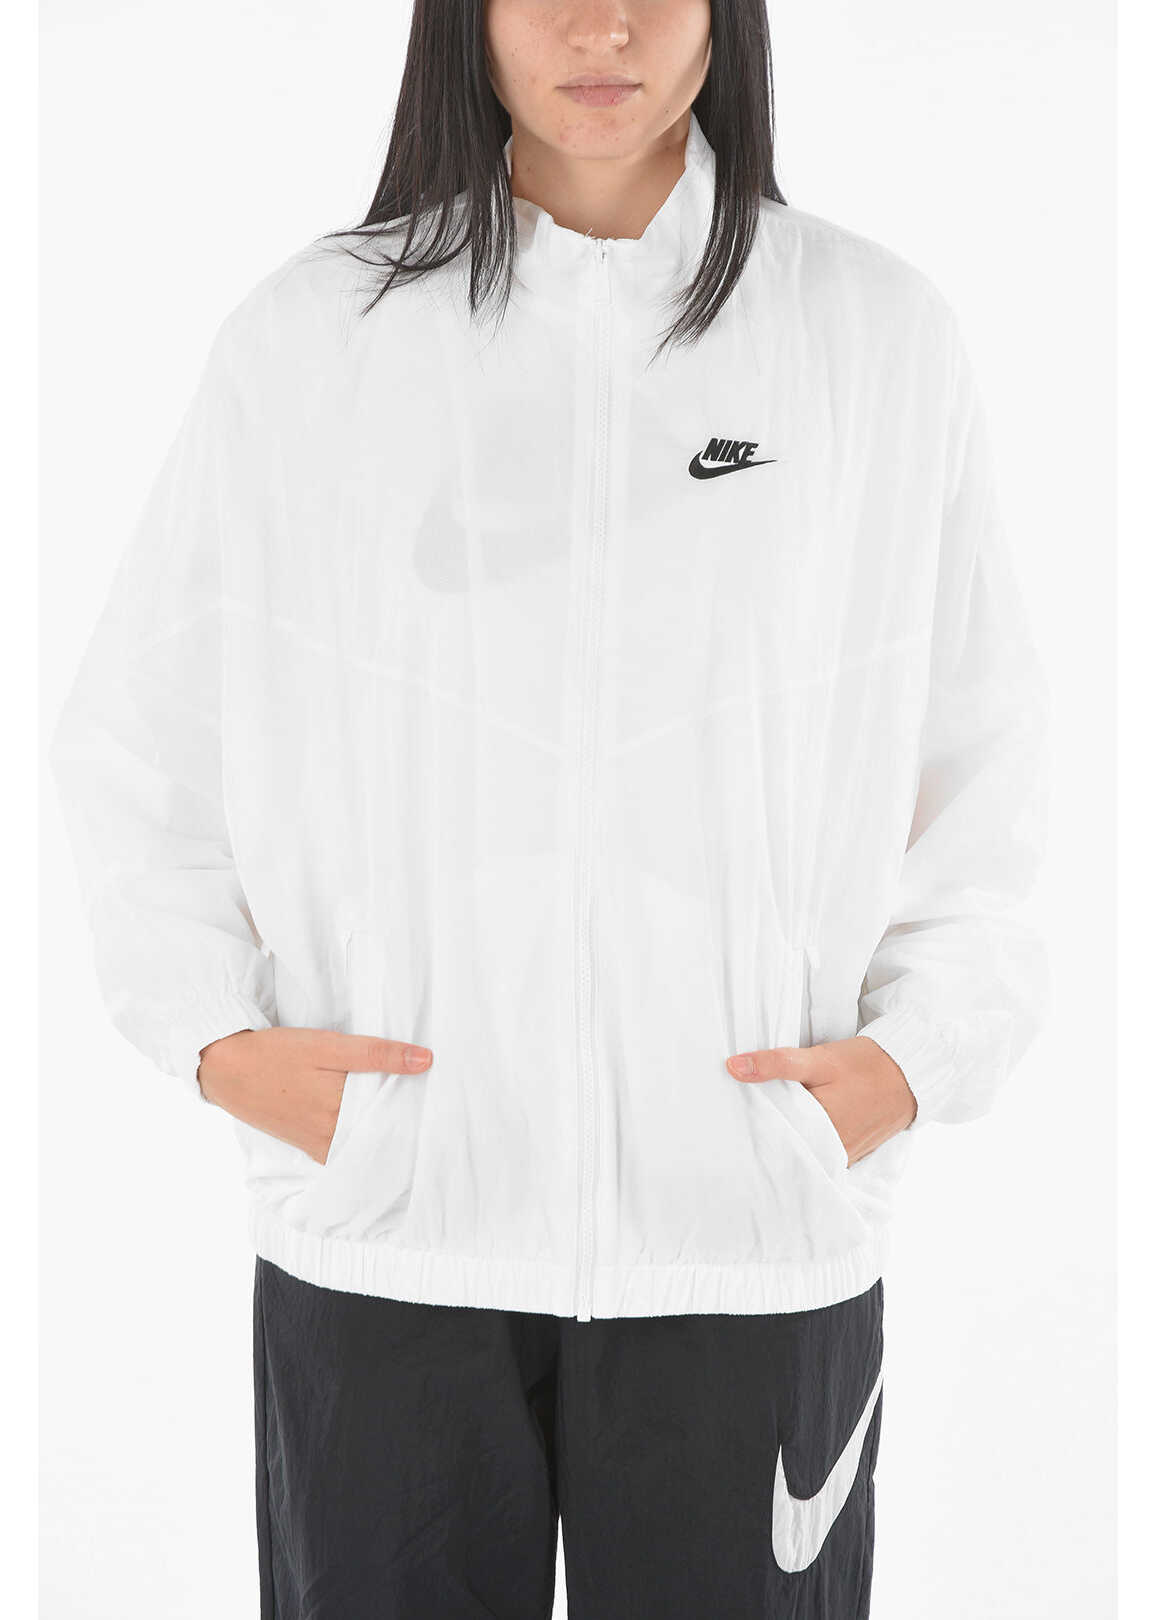 Nike Logo Embroidered Solid Color Windbreaker Jacket White